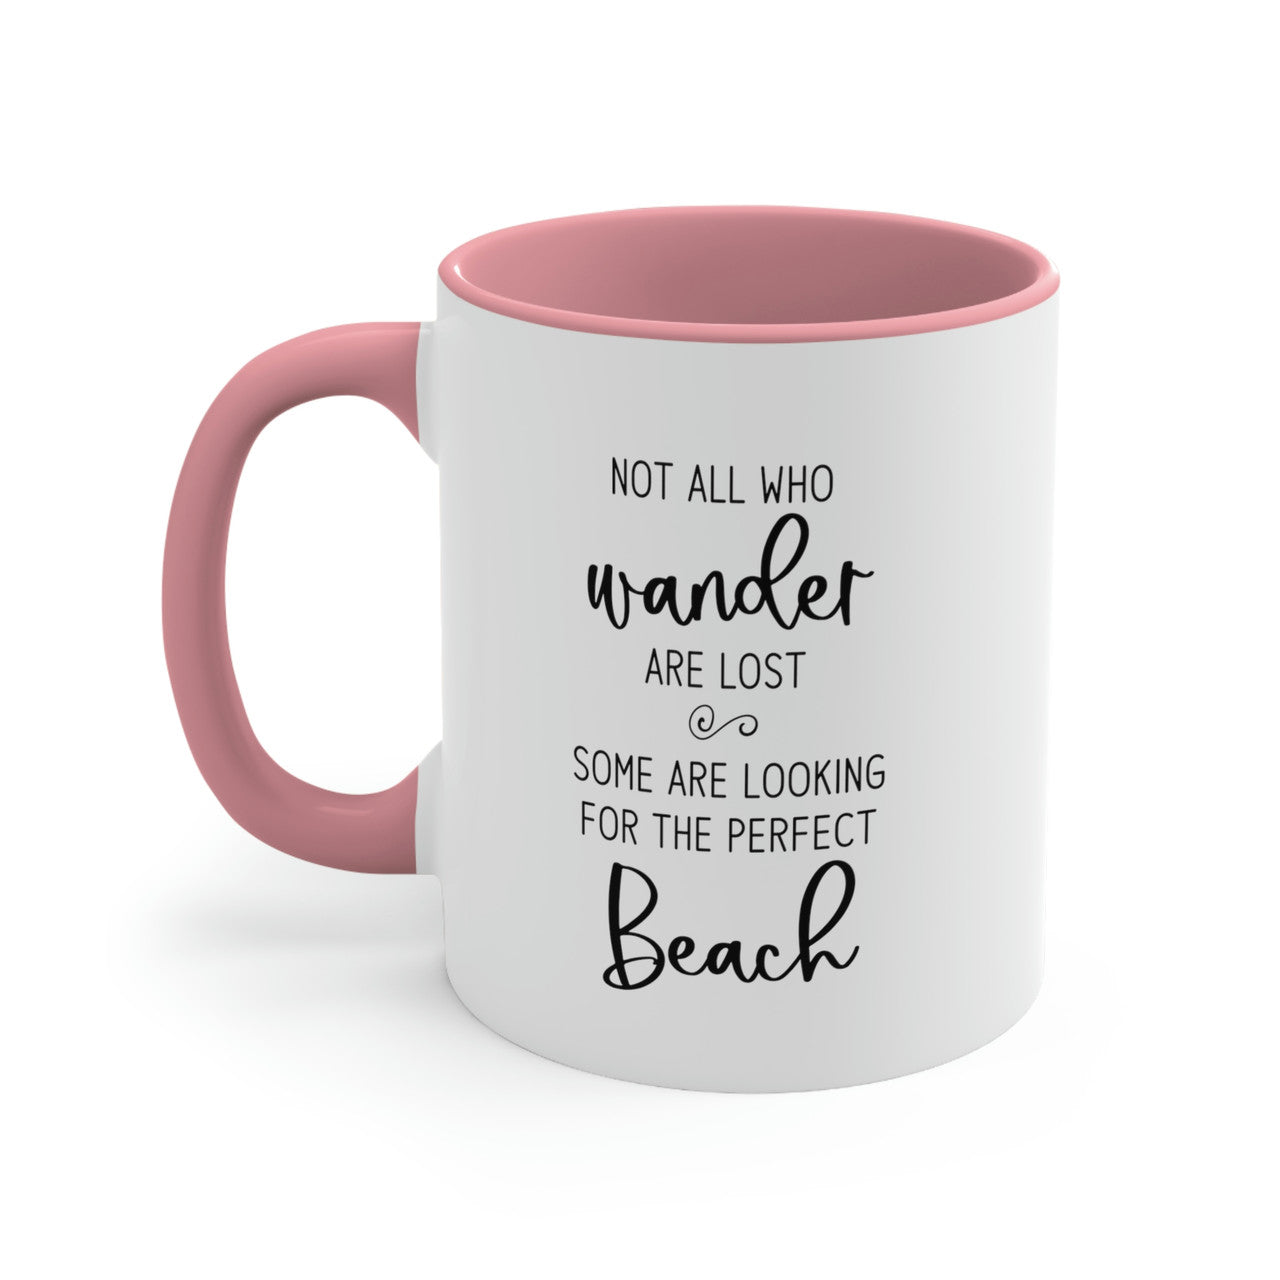 Not All Who Wander Are Lost Ceramic Beach Coffee Mug, 5 Colors Mugs New England Trading Co Pink  